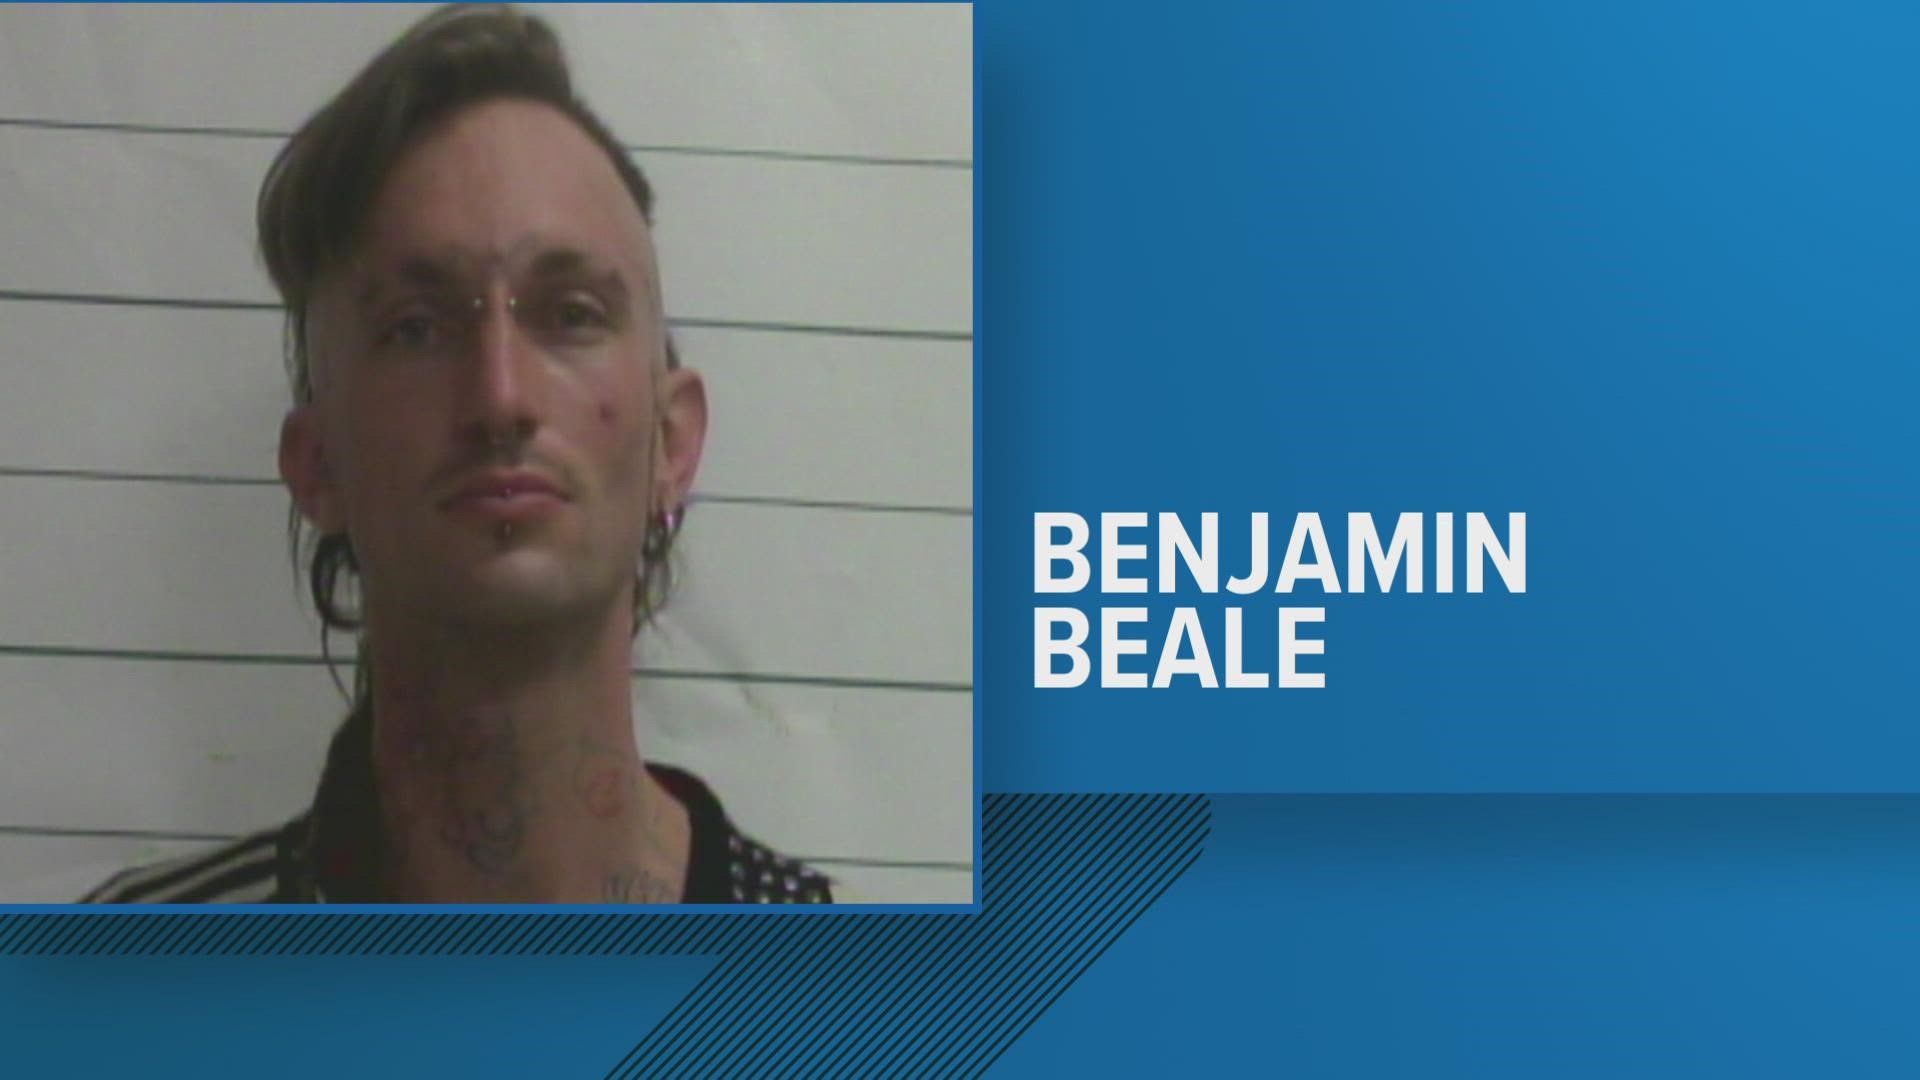 Benjamine Beale was arrested after his alleged girlfriend went missing and then a dismembered body was found in his freezer. Unsure who it is more questions arise.